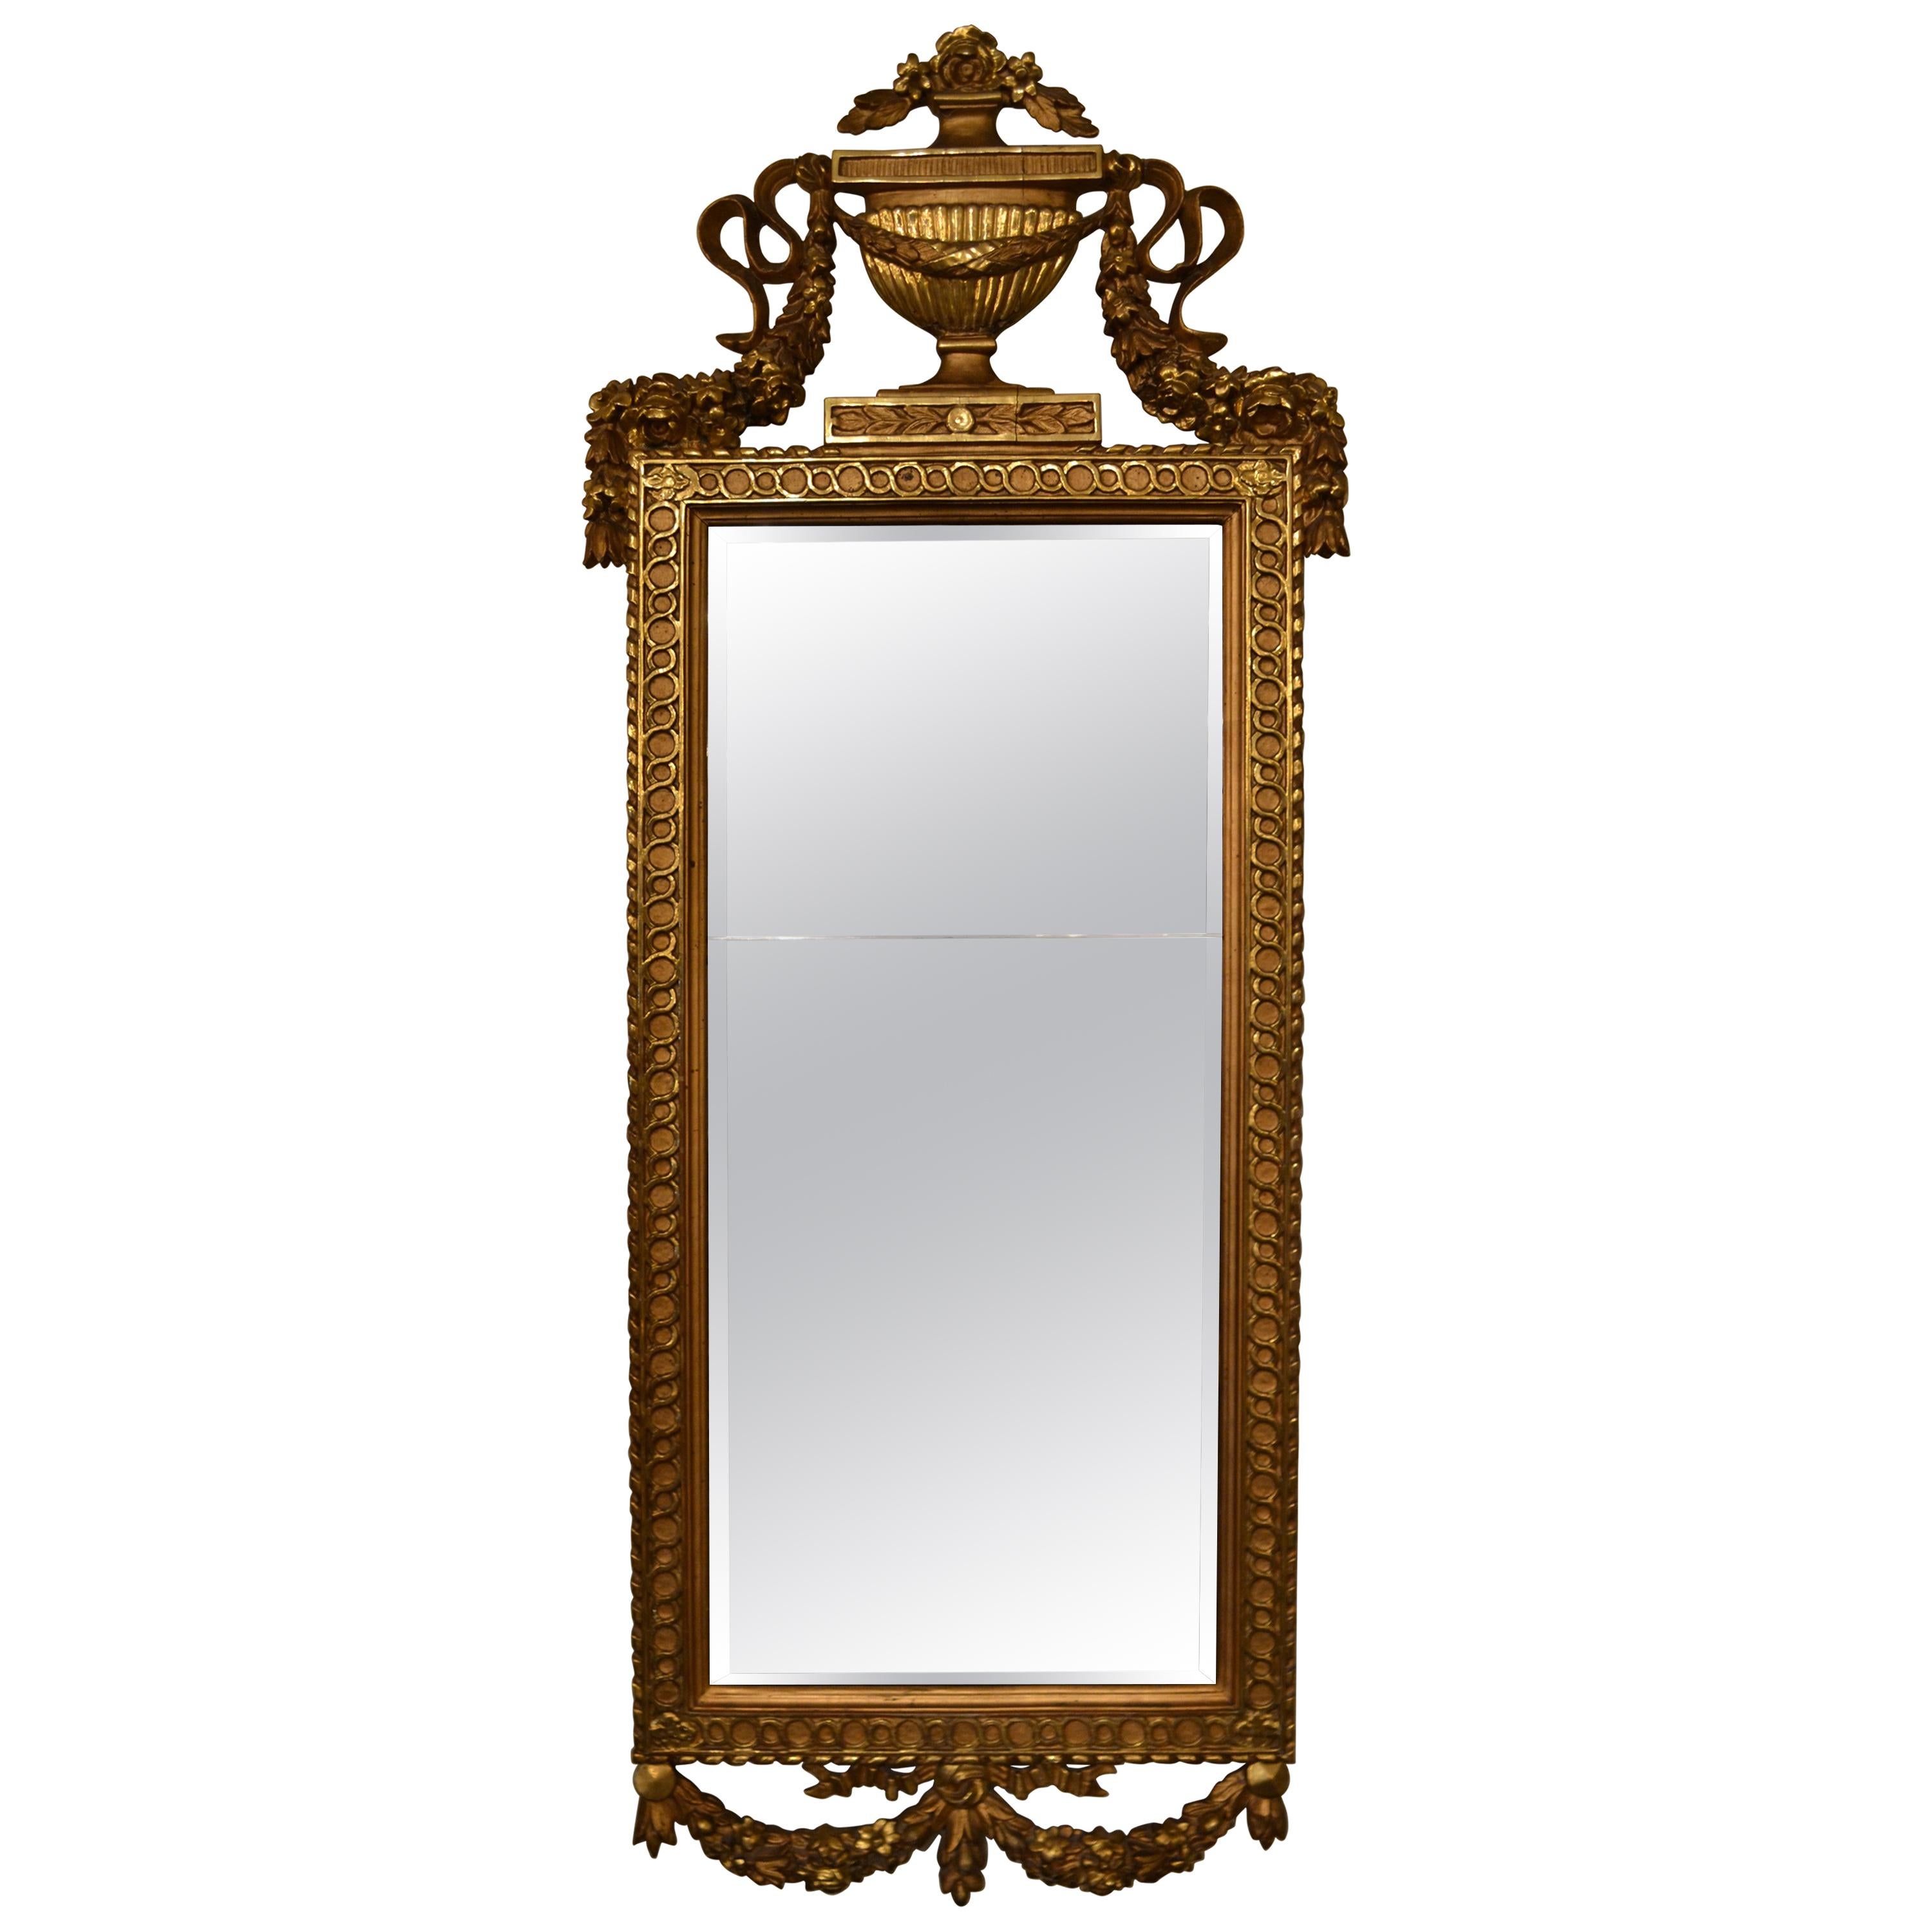 How can I tell if a mirror has mercury in it?